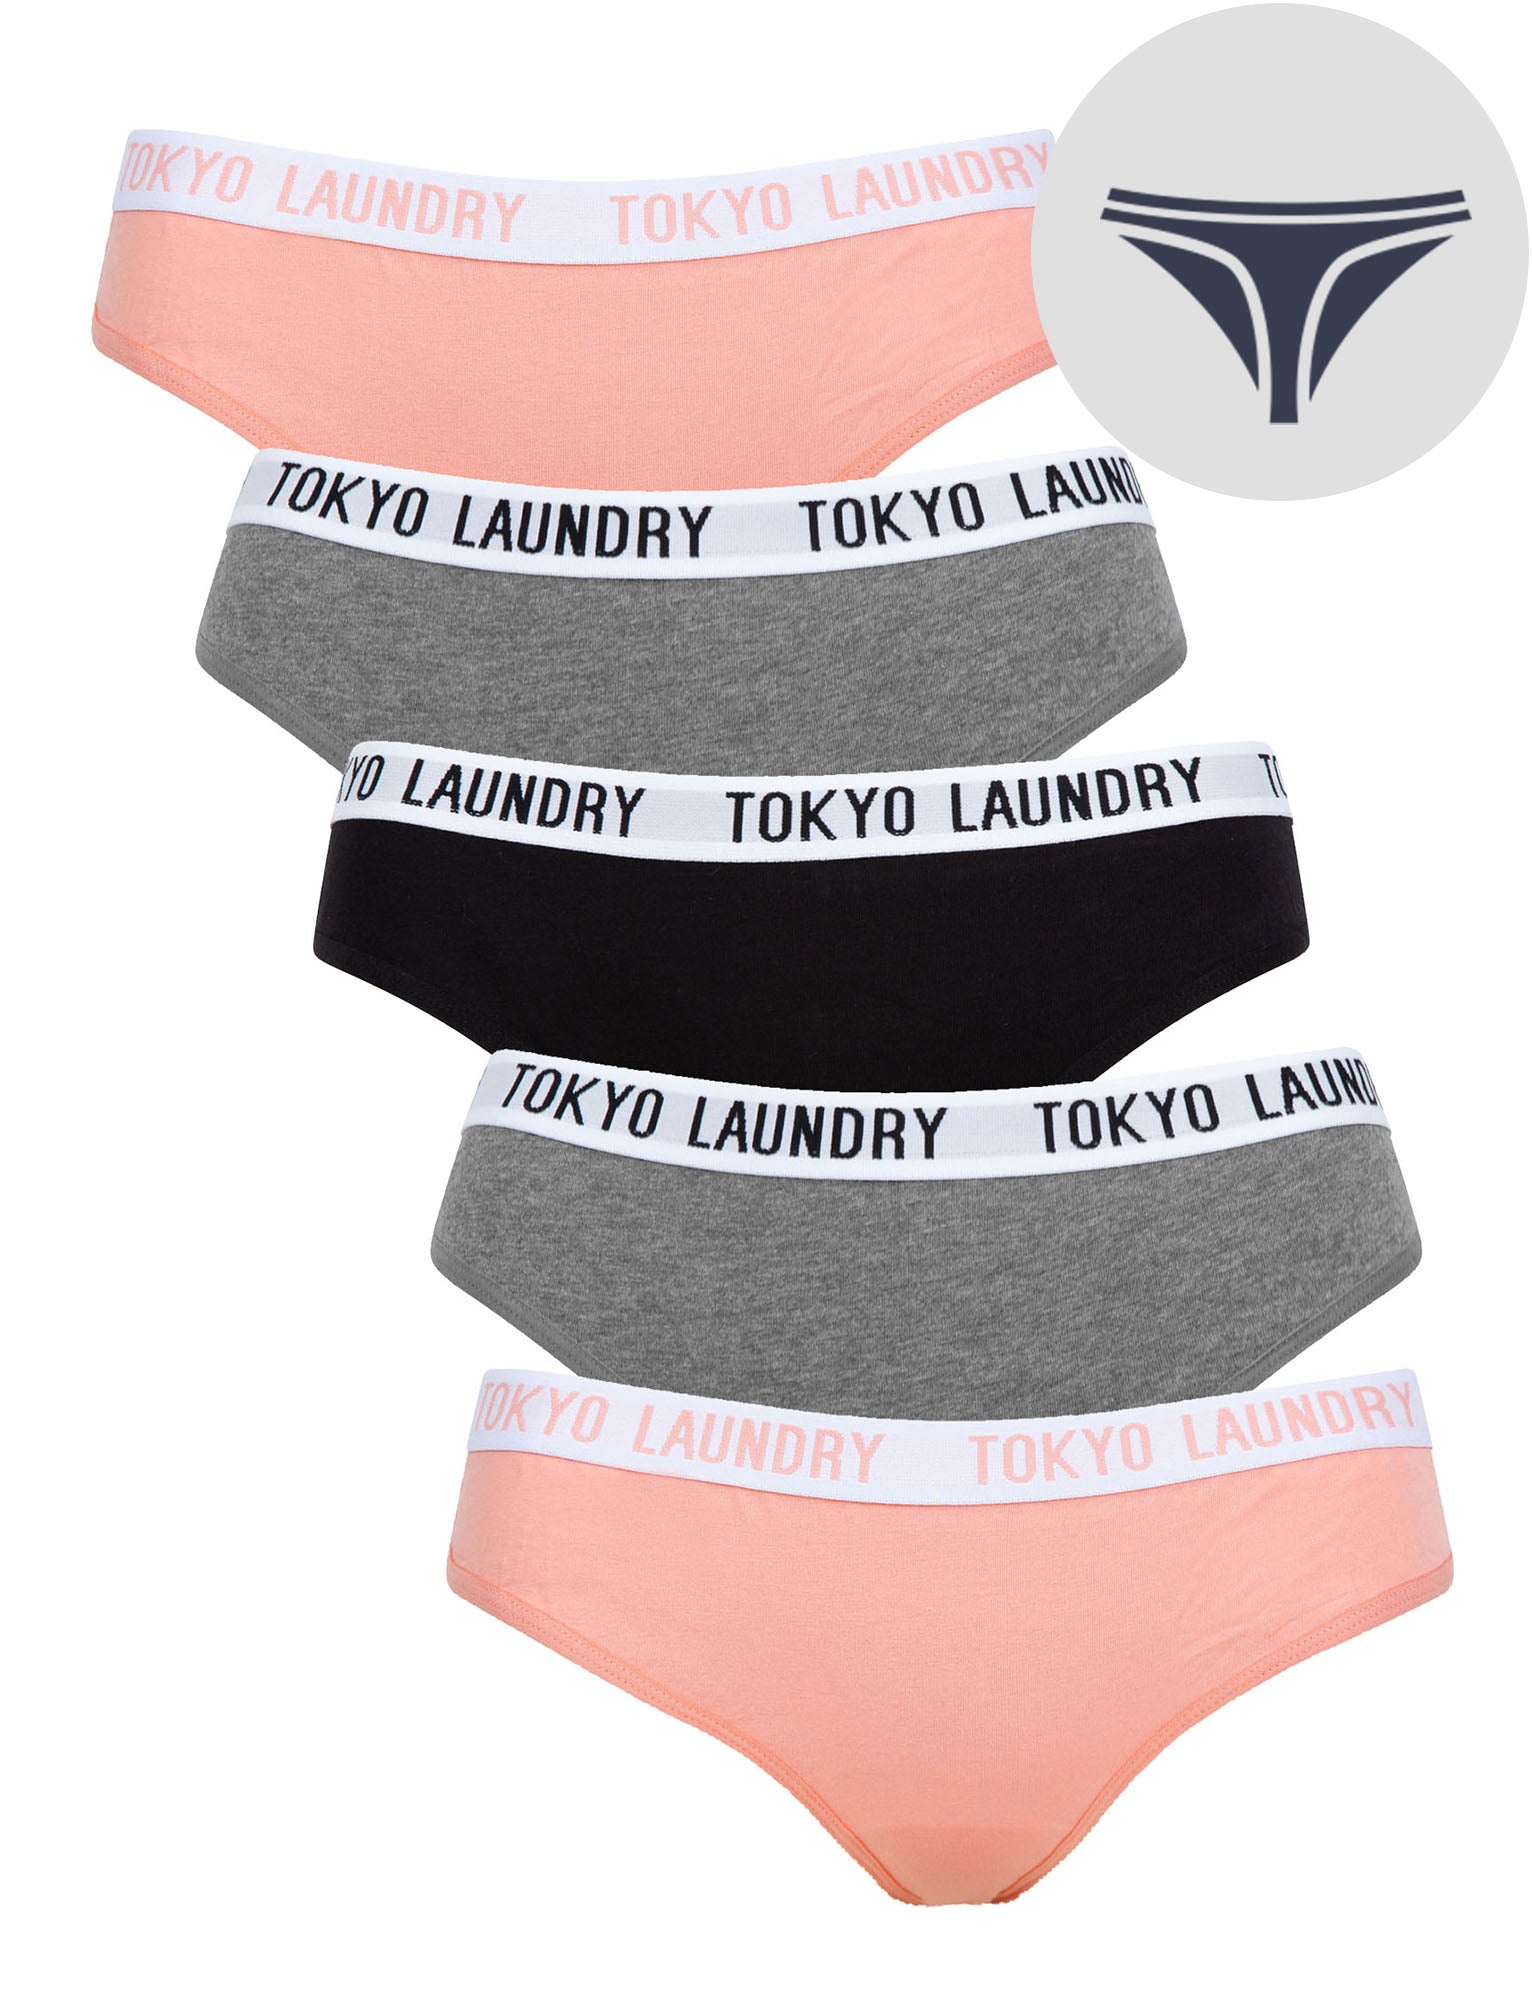 Womens Underwear Milla (5 Pack) Cotton Assorted Thongs in Bridal Rose / Mid Grey Marl / Jet Black - Tokyo Laundry / XS - Tokyo Laundry